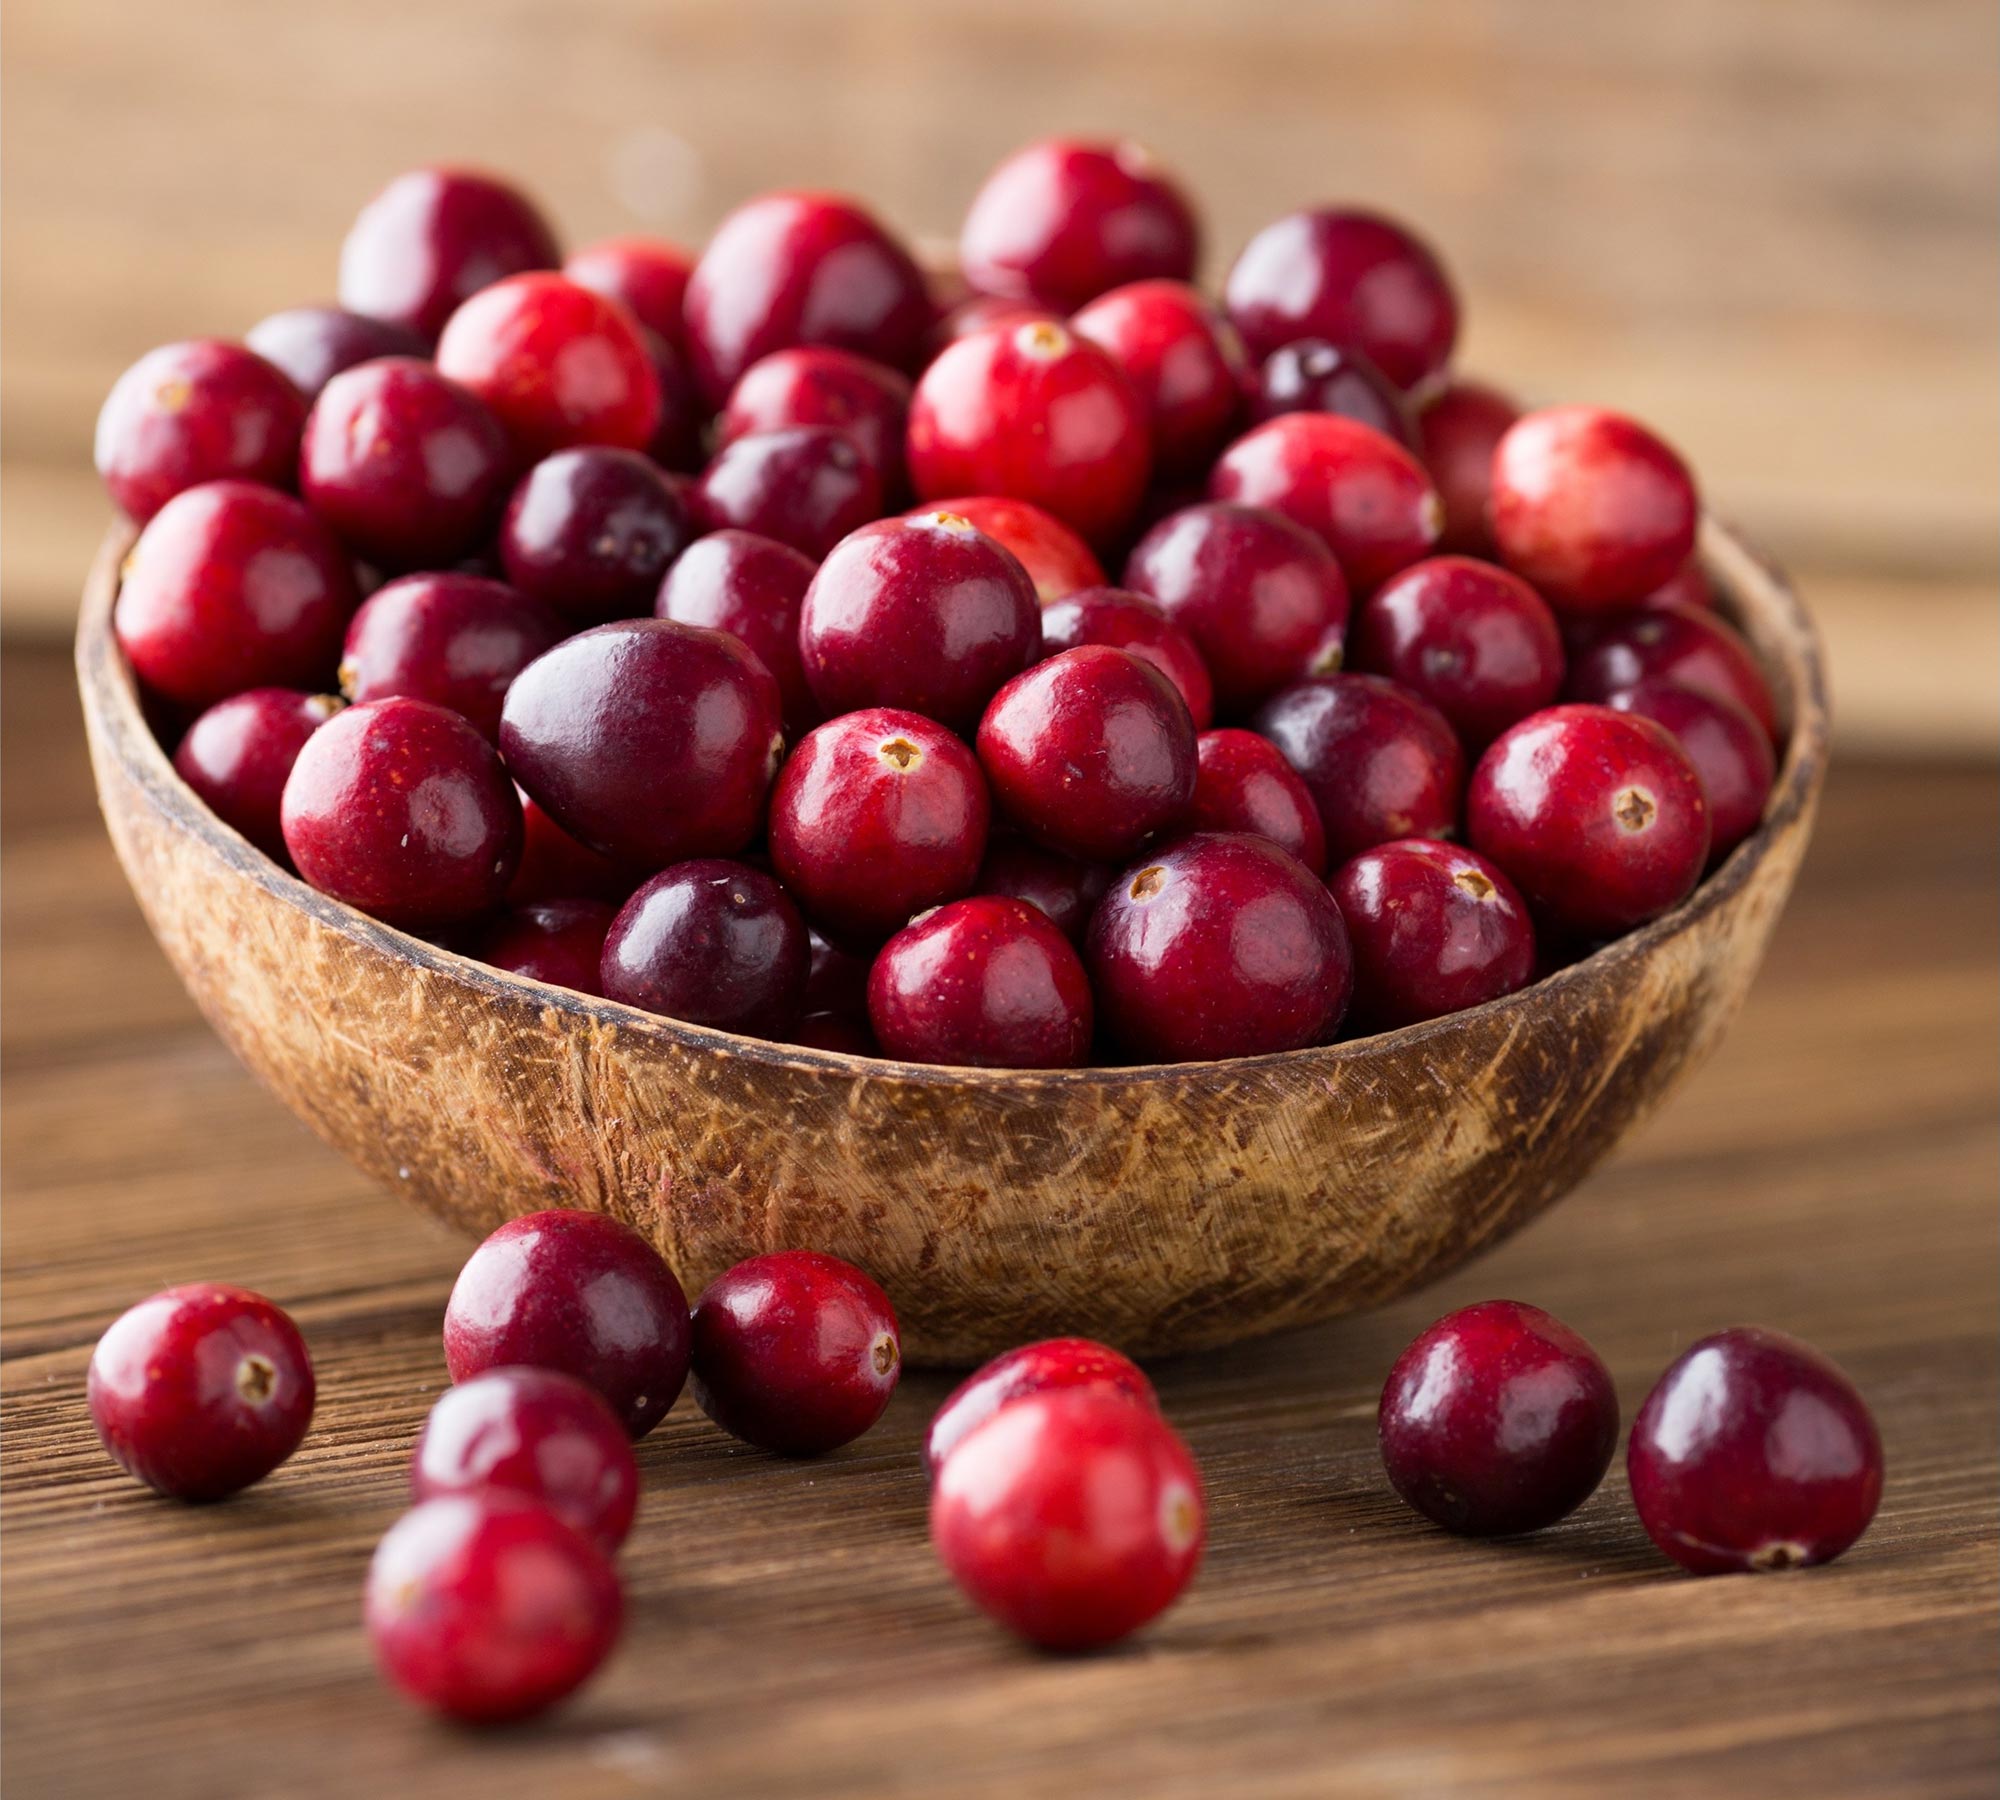 How much cranberry juice should I give my dog for UTI?